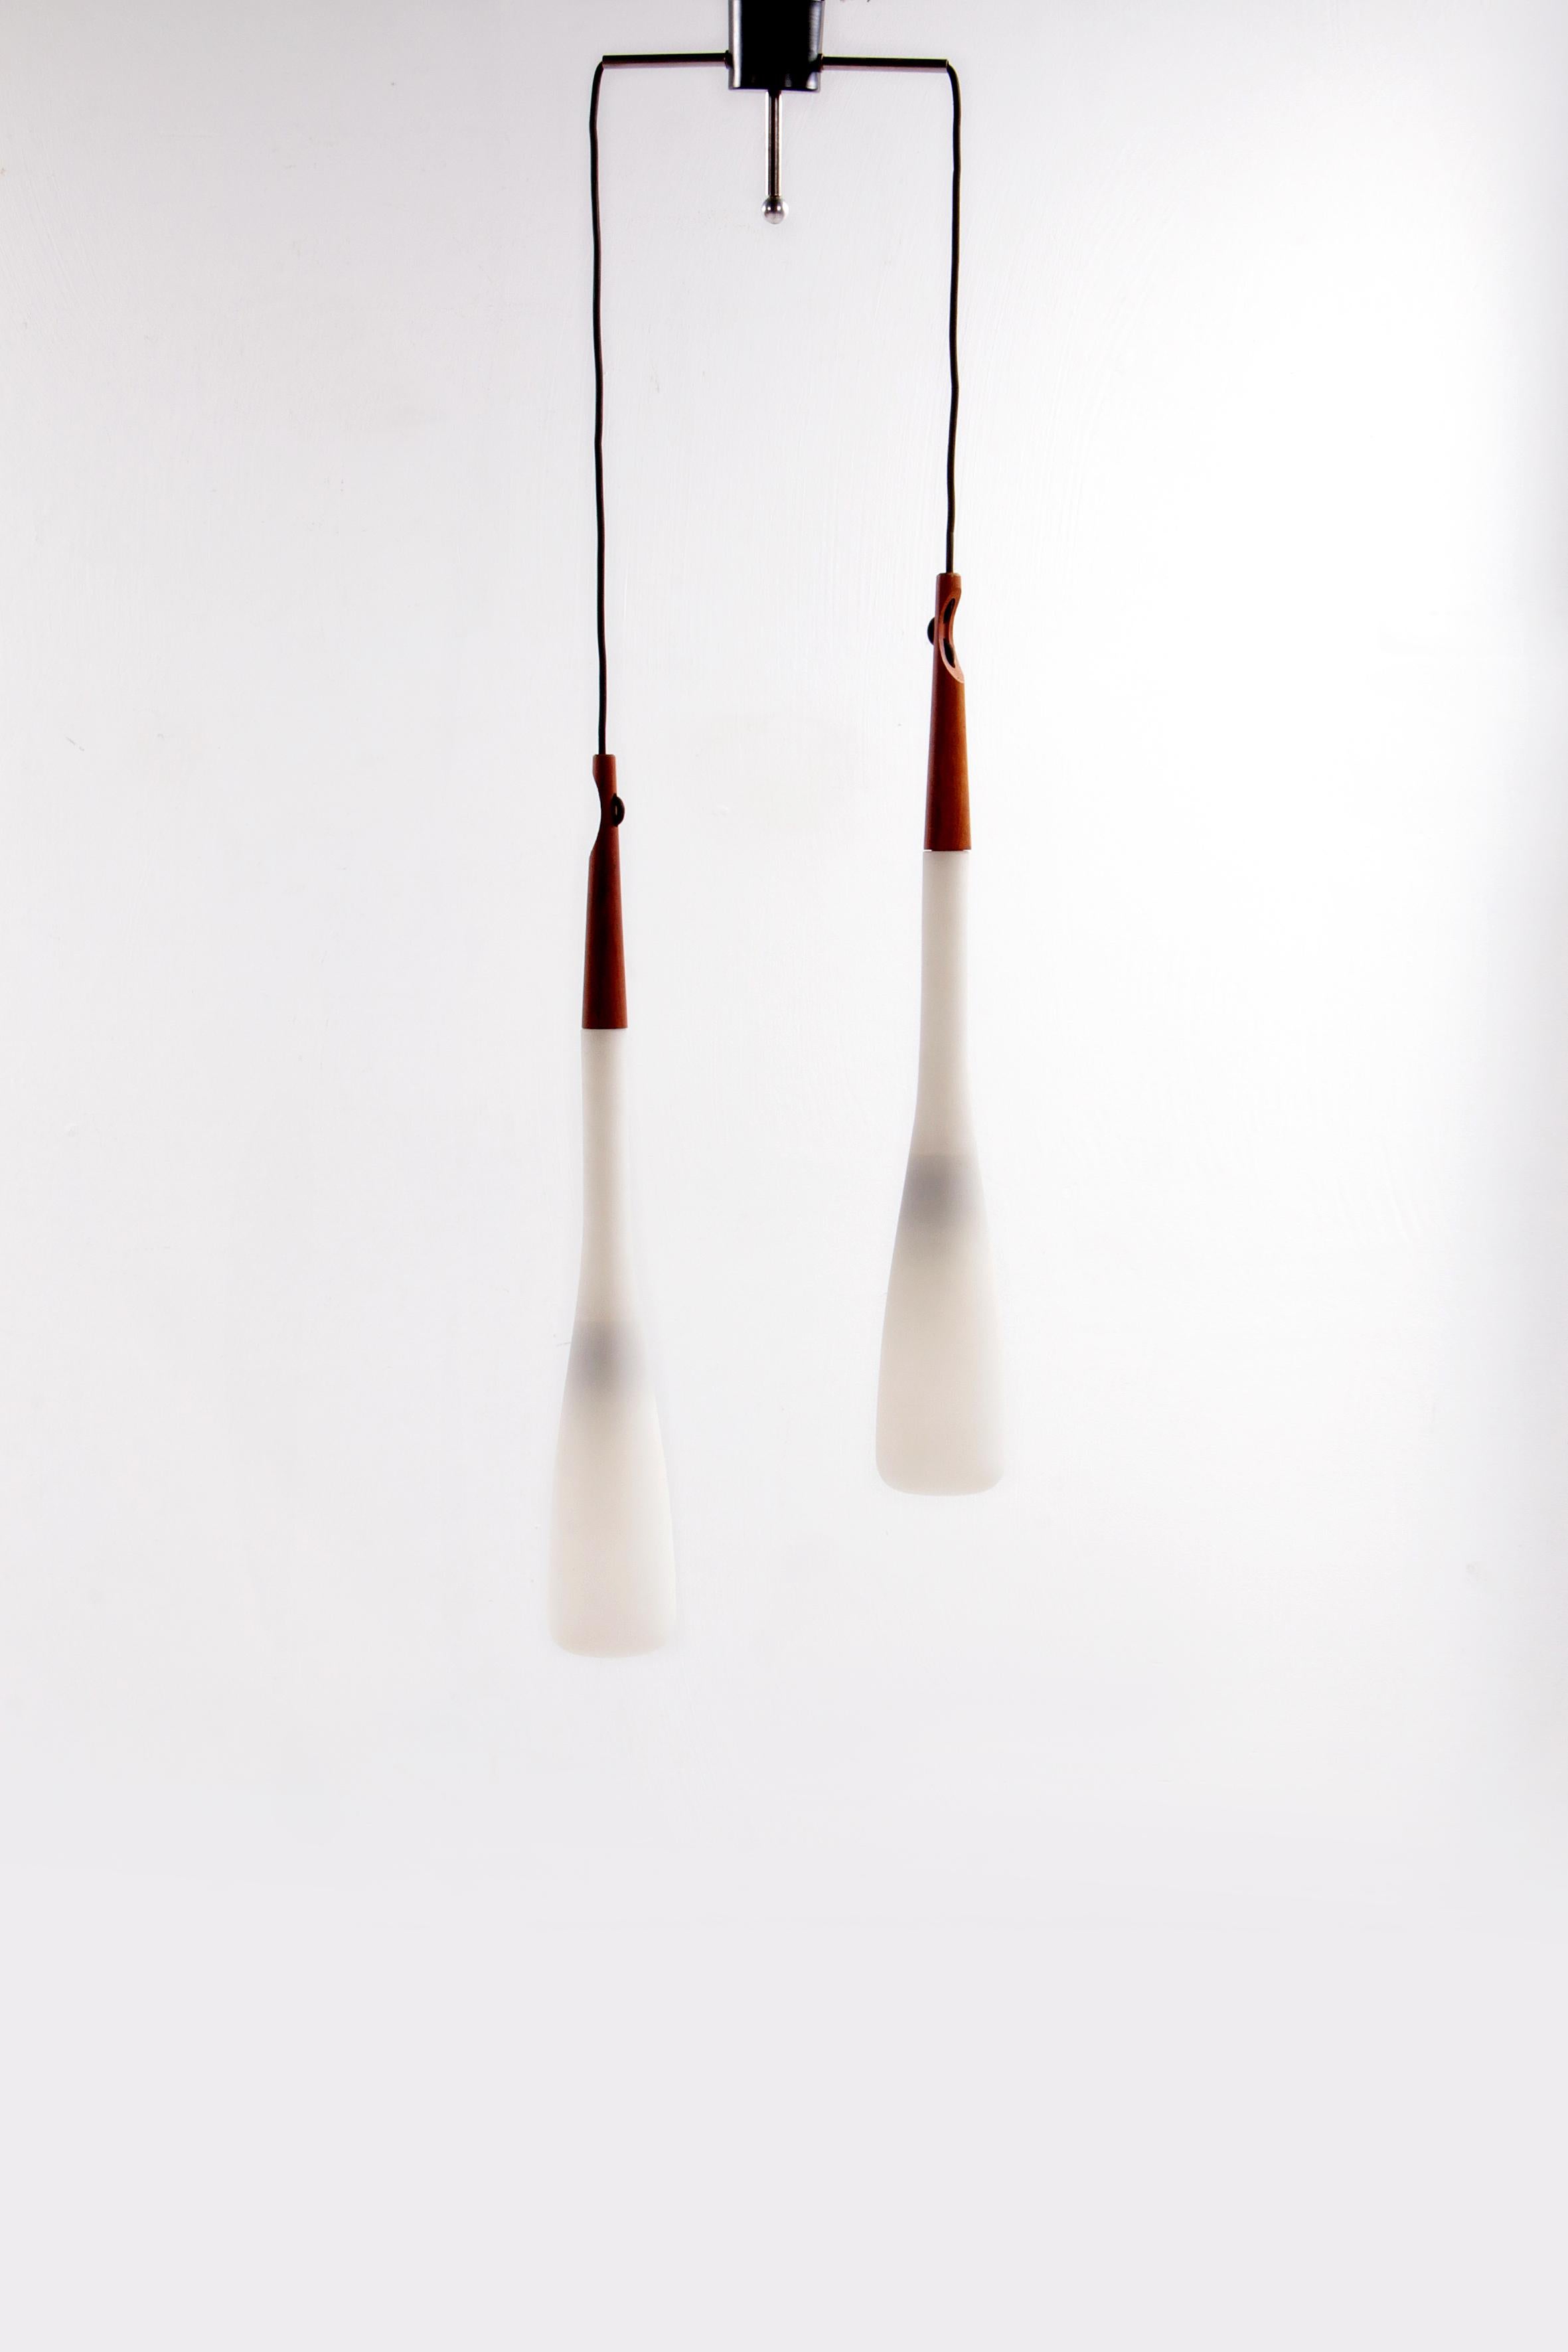 Swedish drop pendant lamp by Uno & Östen Kristiansson for Luxus, 1950s


Beautiful hanging lamp, the design is by Uno & Osten Kristiansson and made by Luxus Vittsjo. In Sweden in the 50's.

Made from a teak fitting with a special recognizable